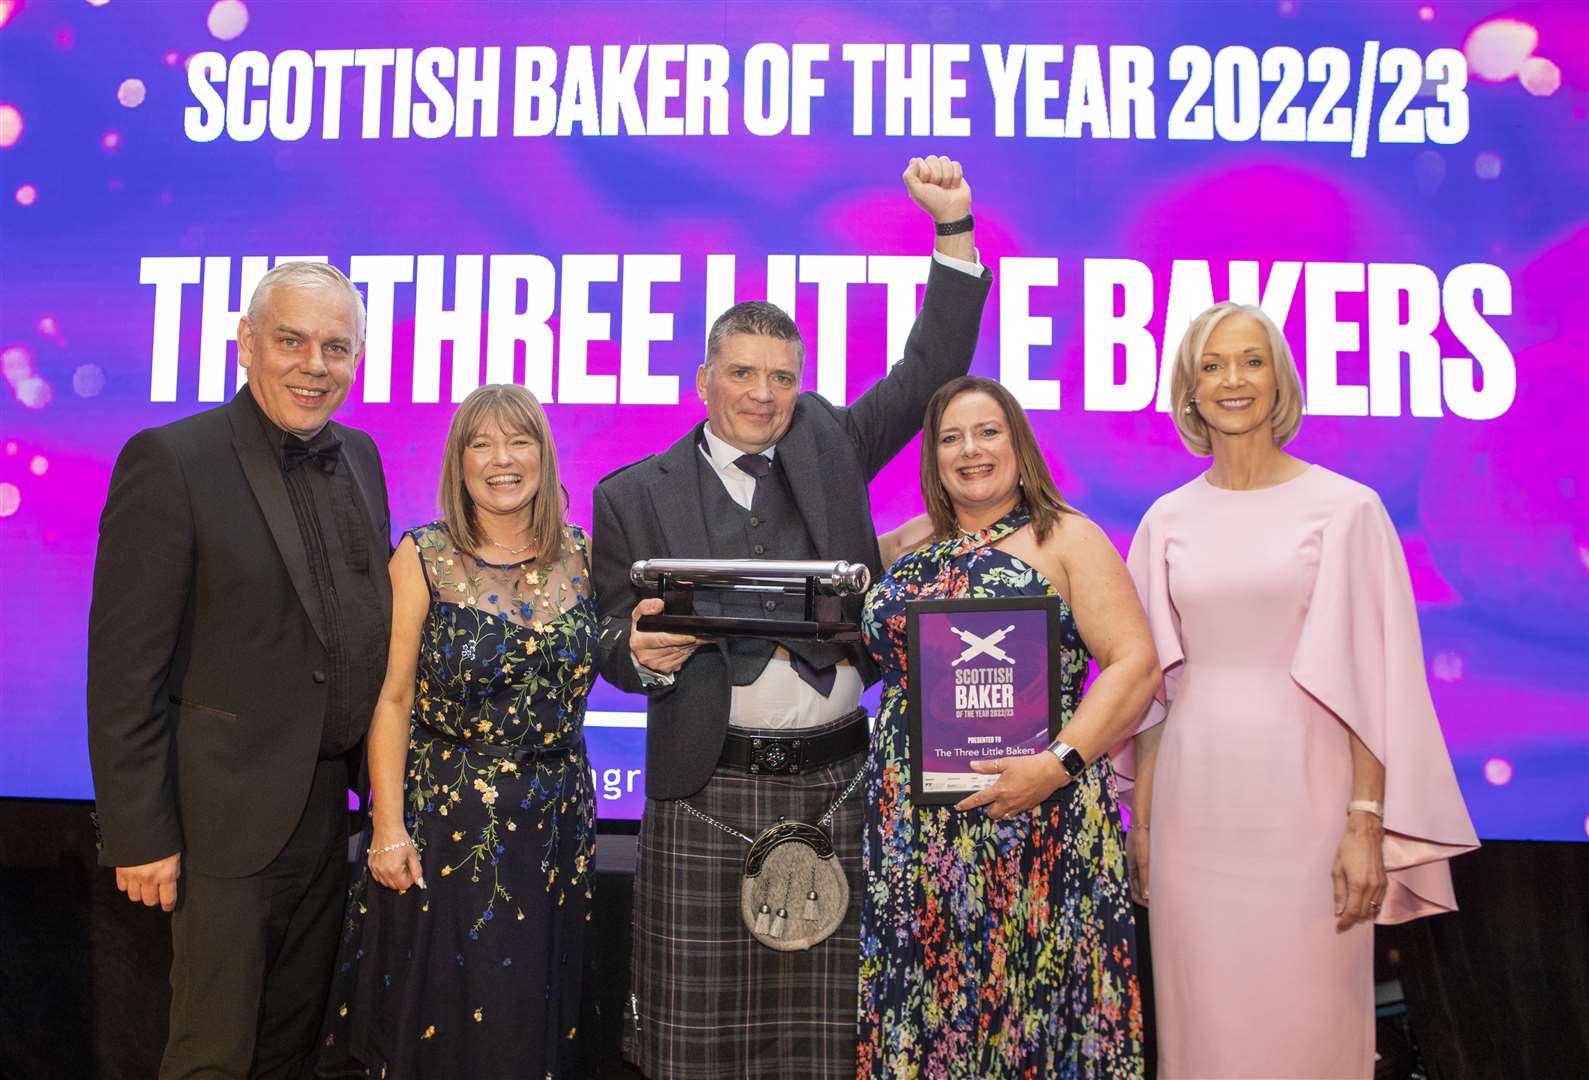 The Three Little Bakers of Inverness were crowned Scottish Baker of the Year.